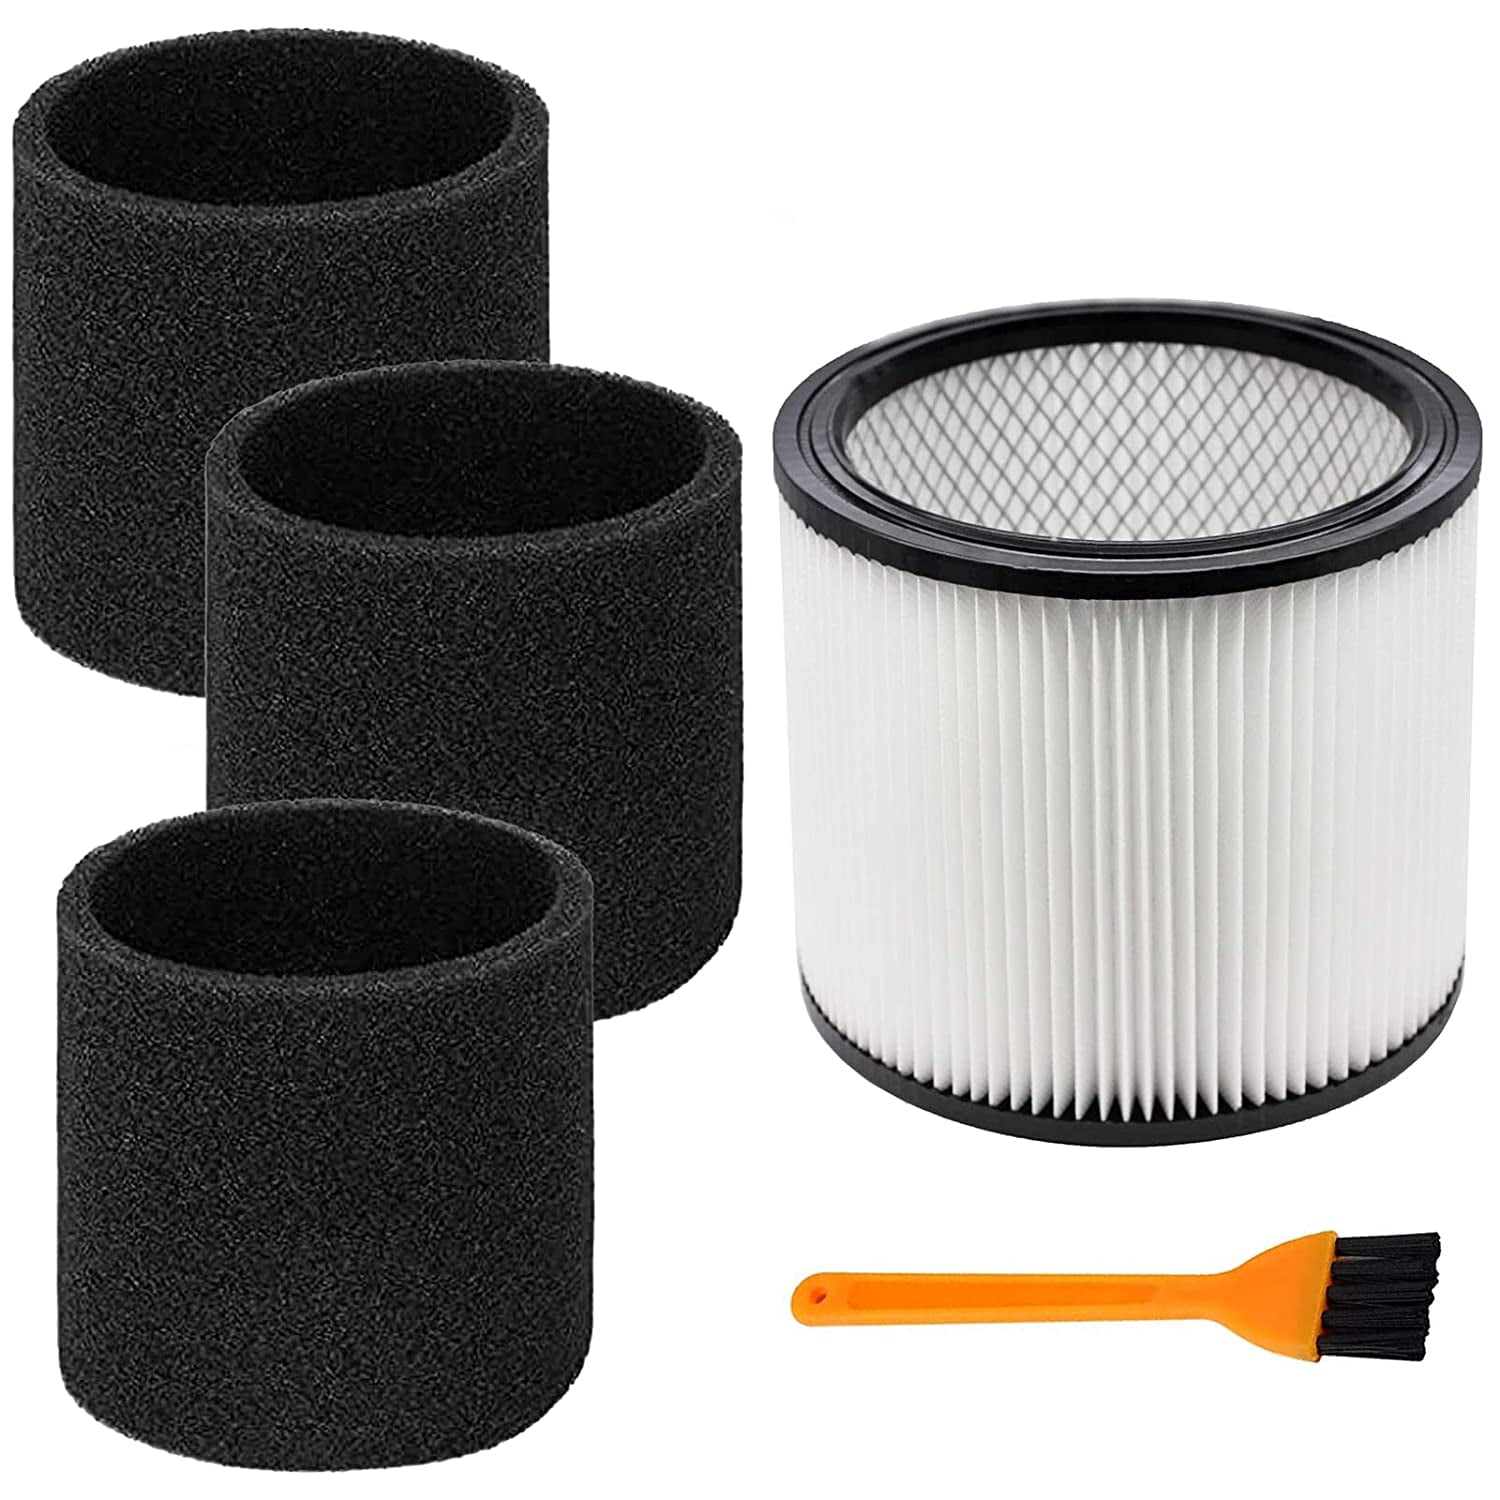 Details about   Vacuum Cleaner Cartridge Filter for Shop Vac 90304 Wet Dry Vacuum Cleaner 